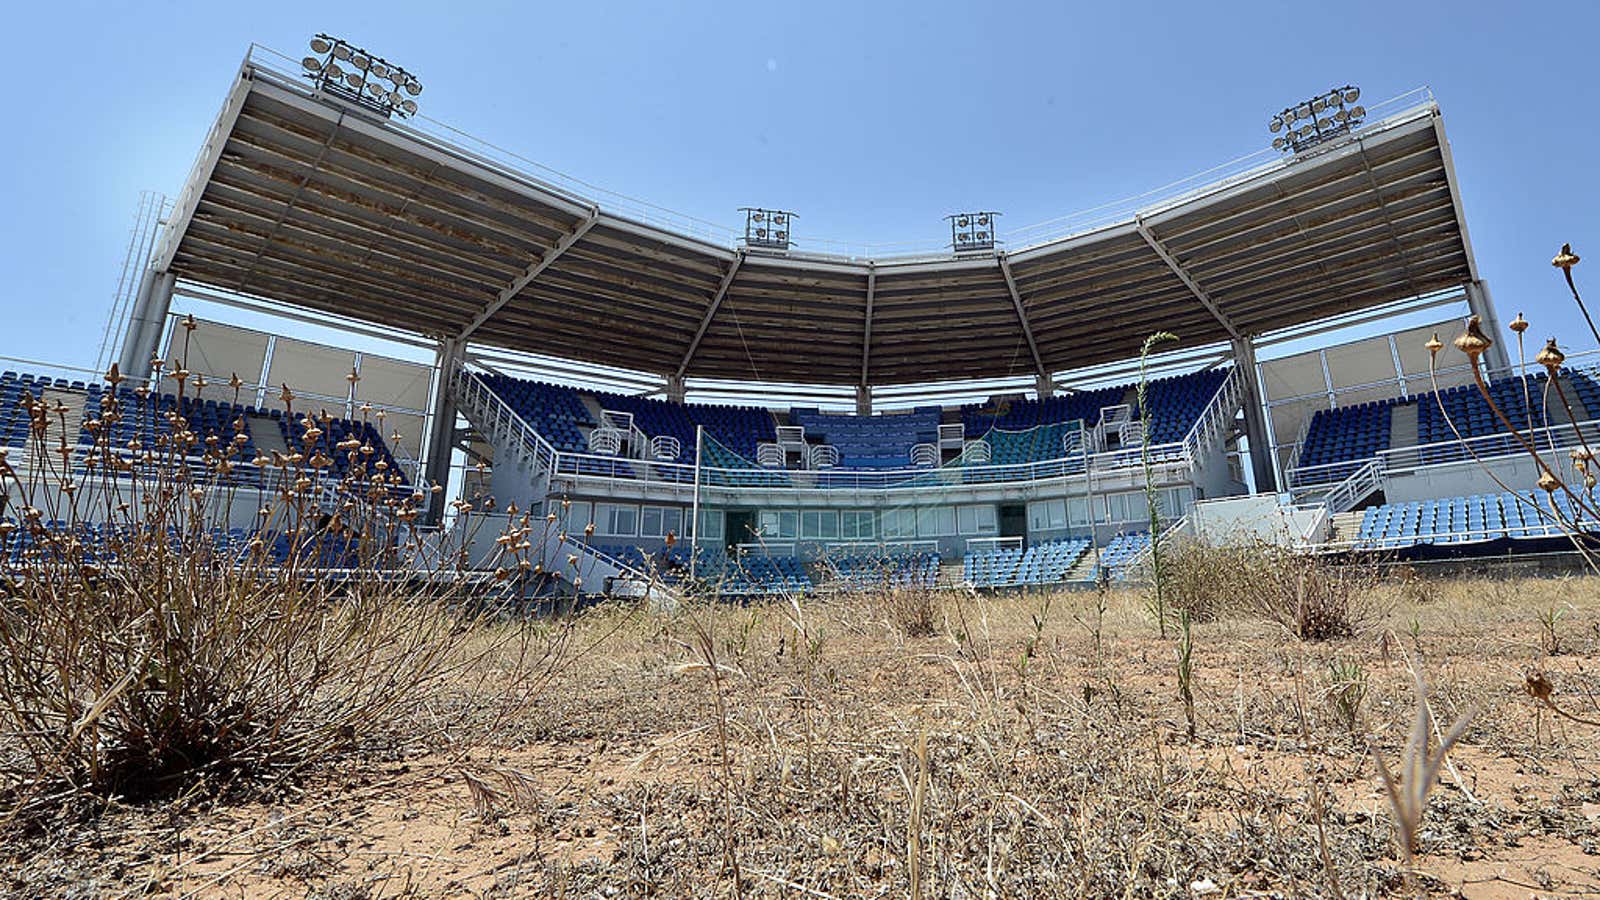 General view of the Olympic Softball stadium at the Helliniko Olympic complex in Athens, Greece on July 31, 2014